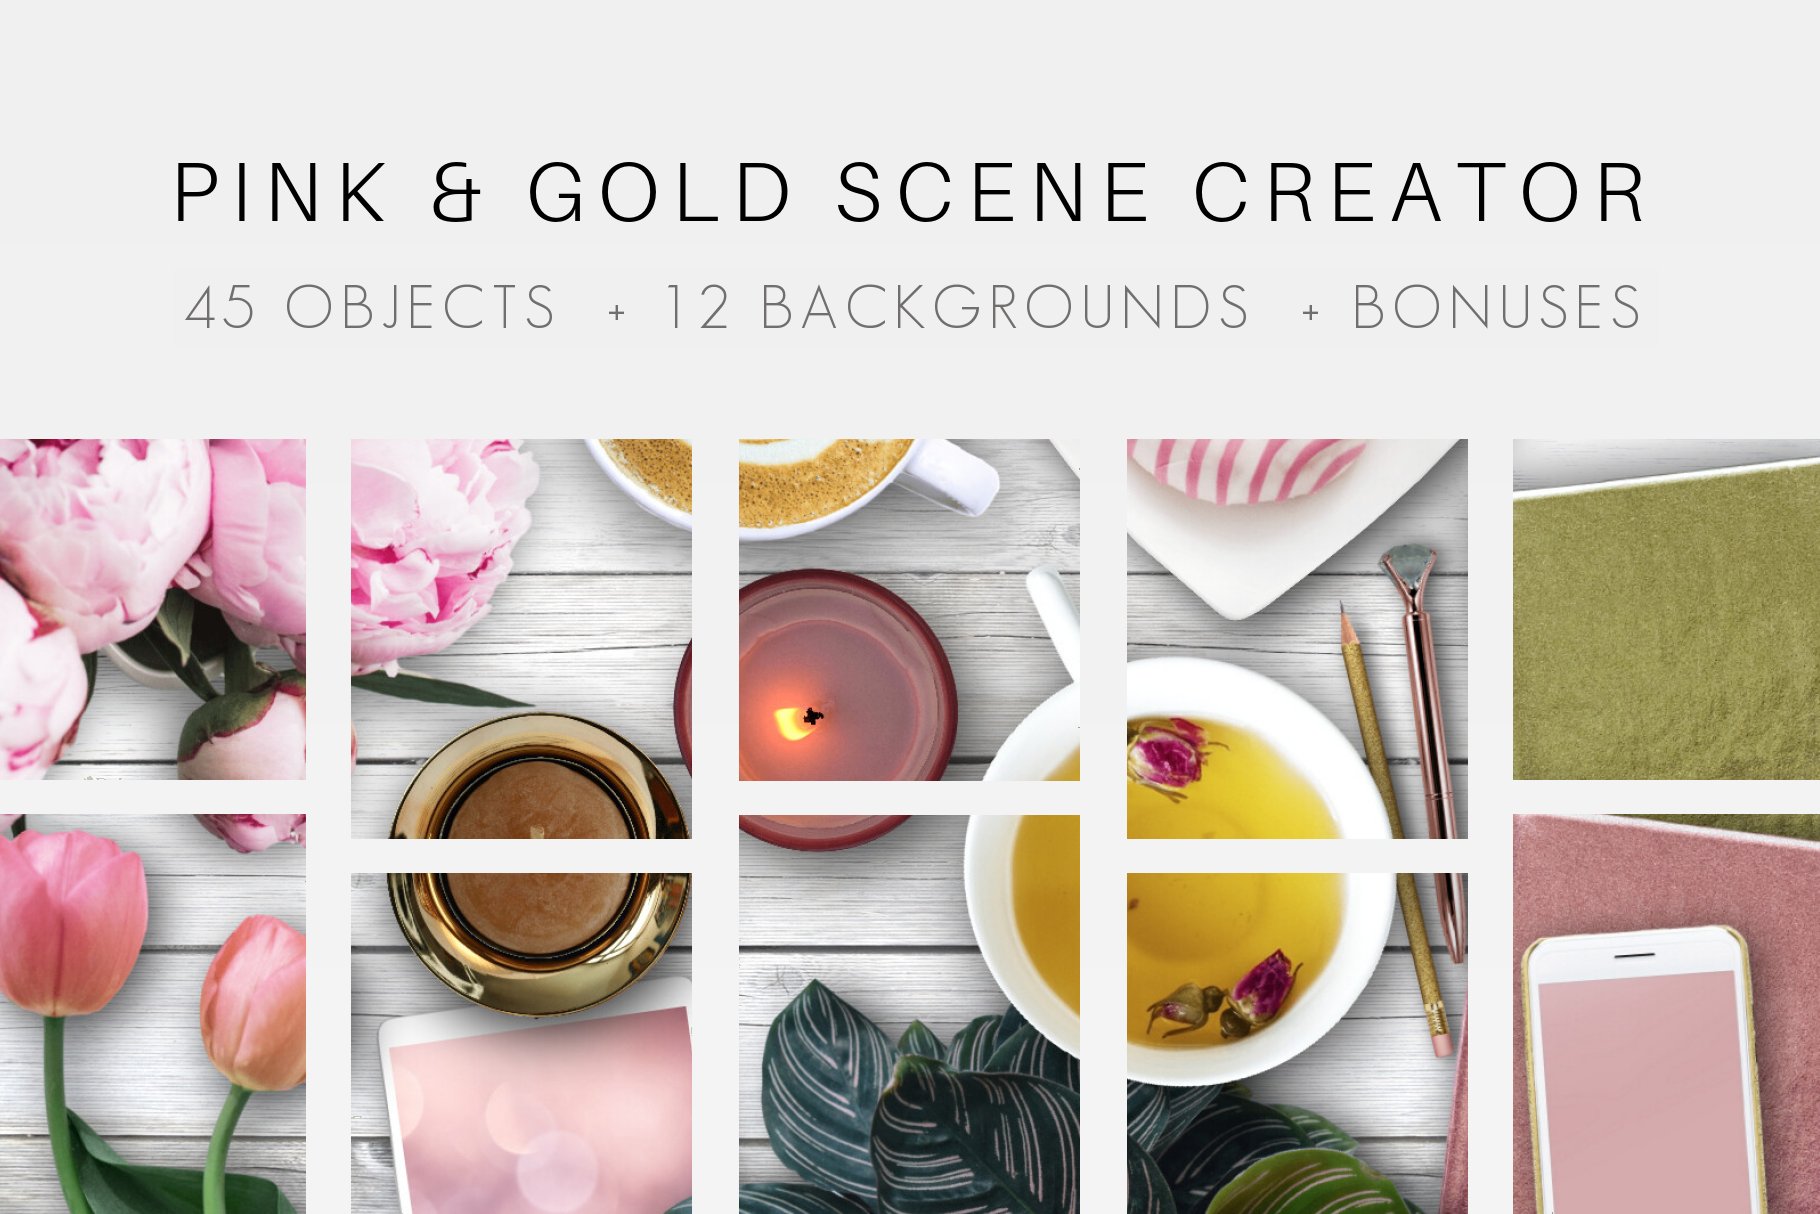 Pink & Gold Scene Creator cover image.